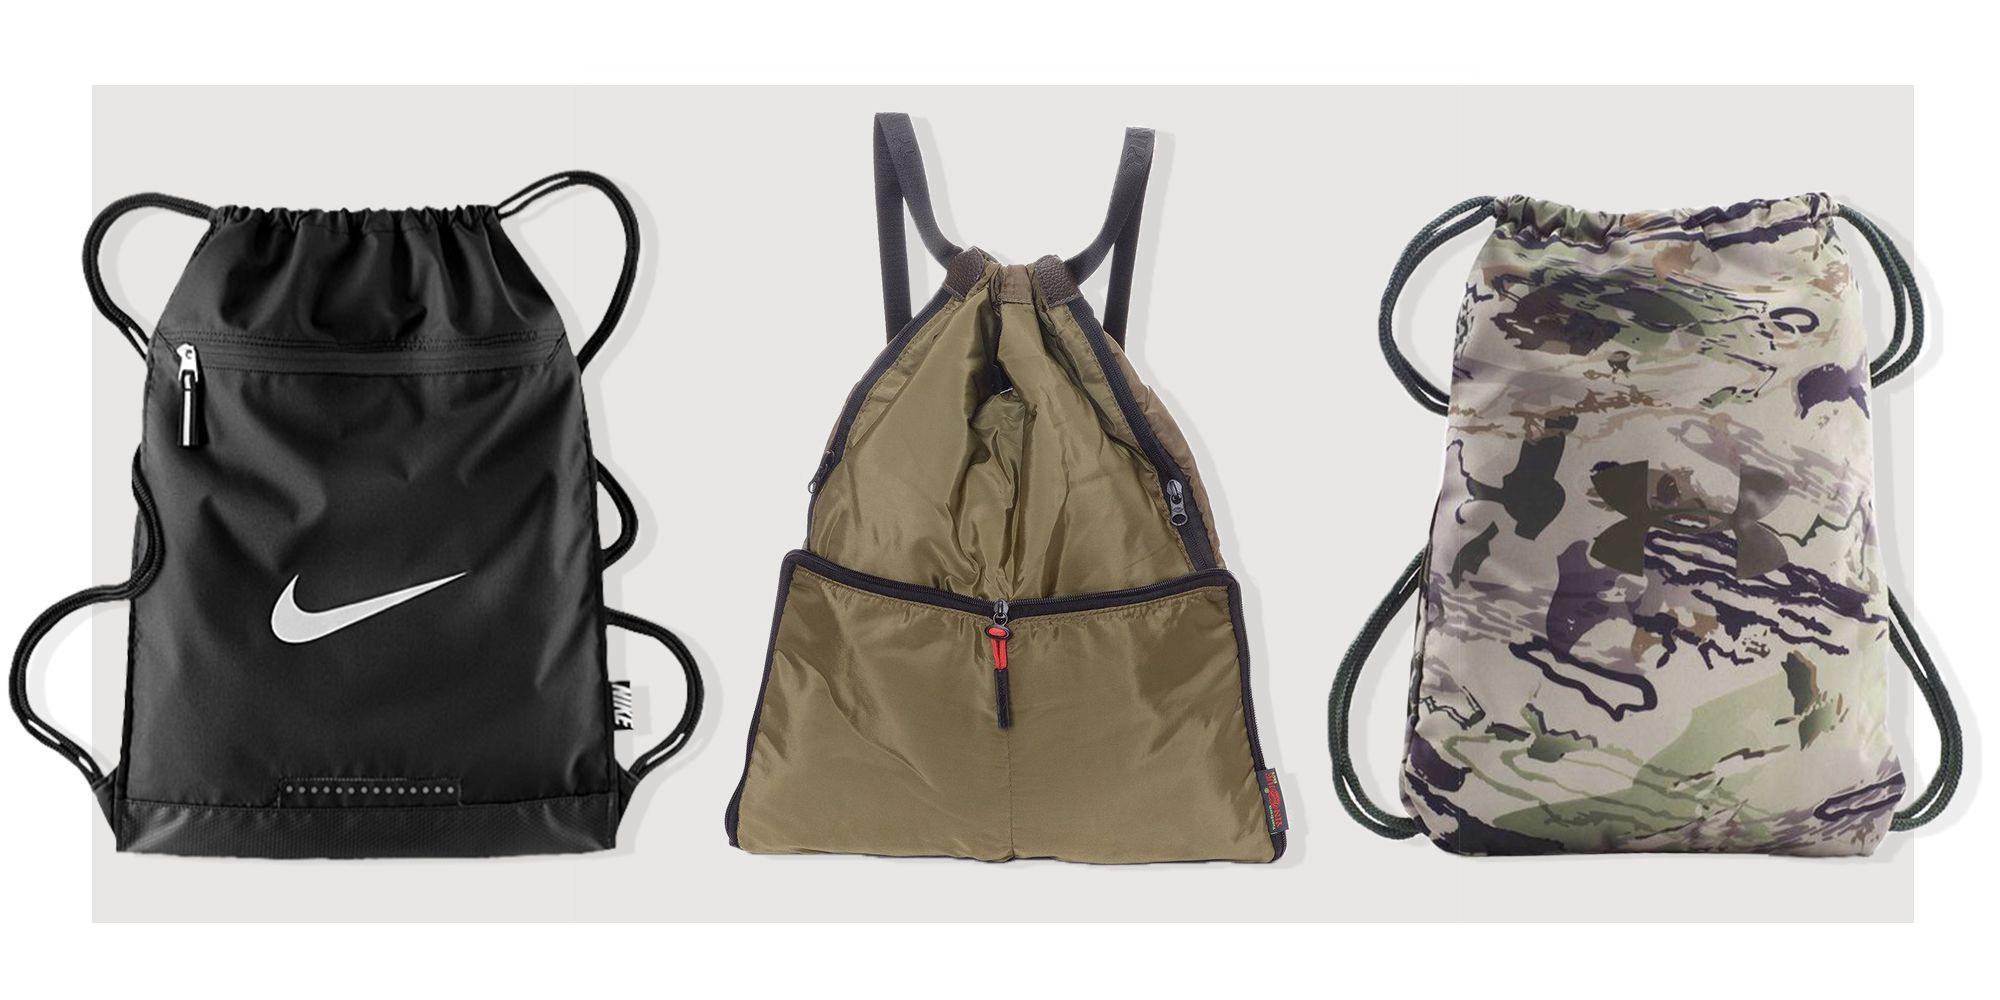 11 Best Drawstring Backpacks 2018 - Cinch Bags for the Gym